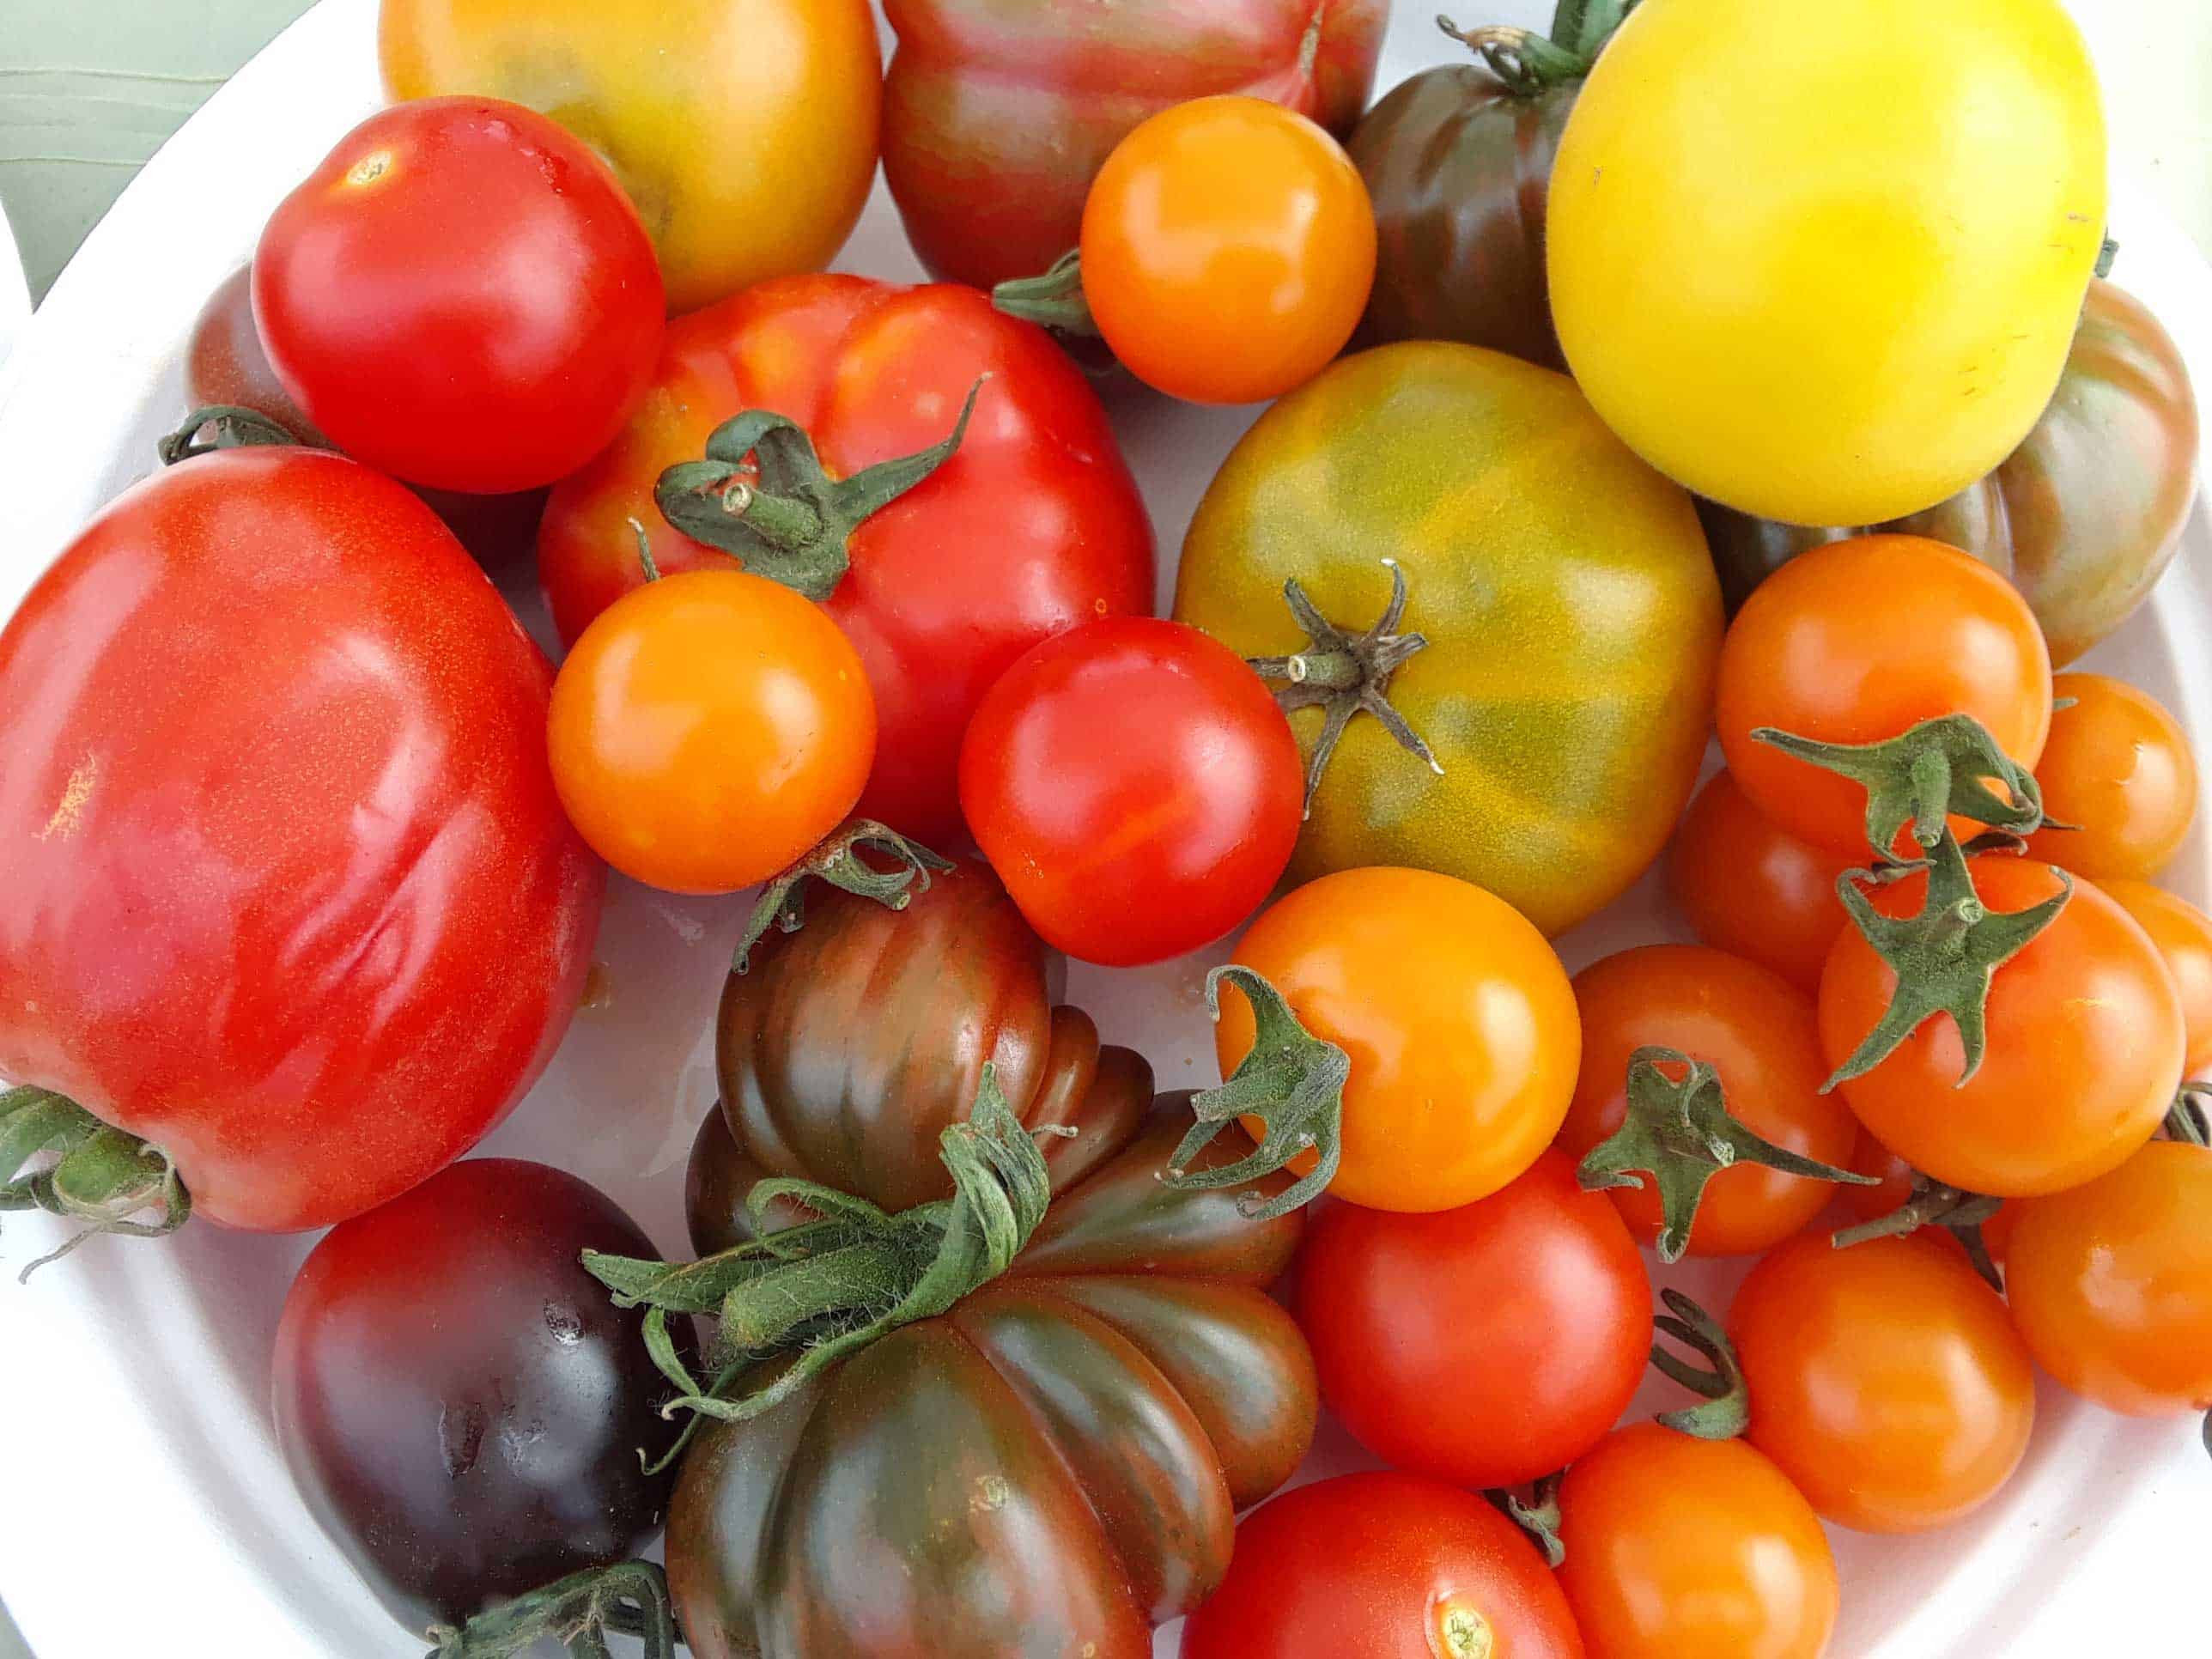 Find Your Perfect Tomato & Get Growing: Join Our Tomatoes and Discover a World of Varieties!